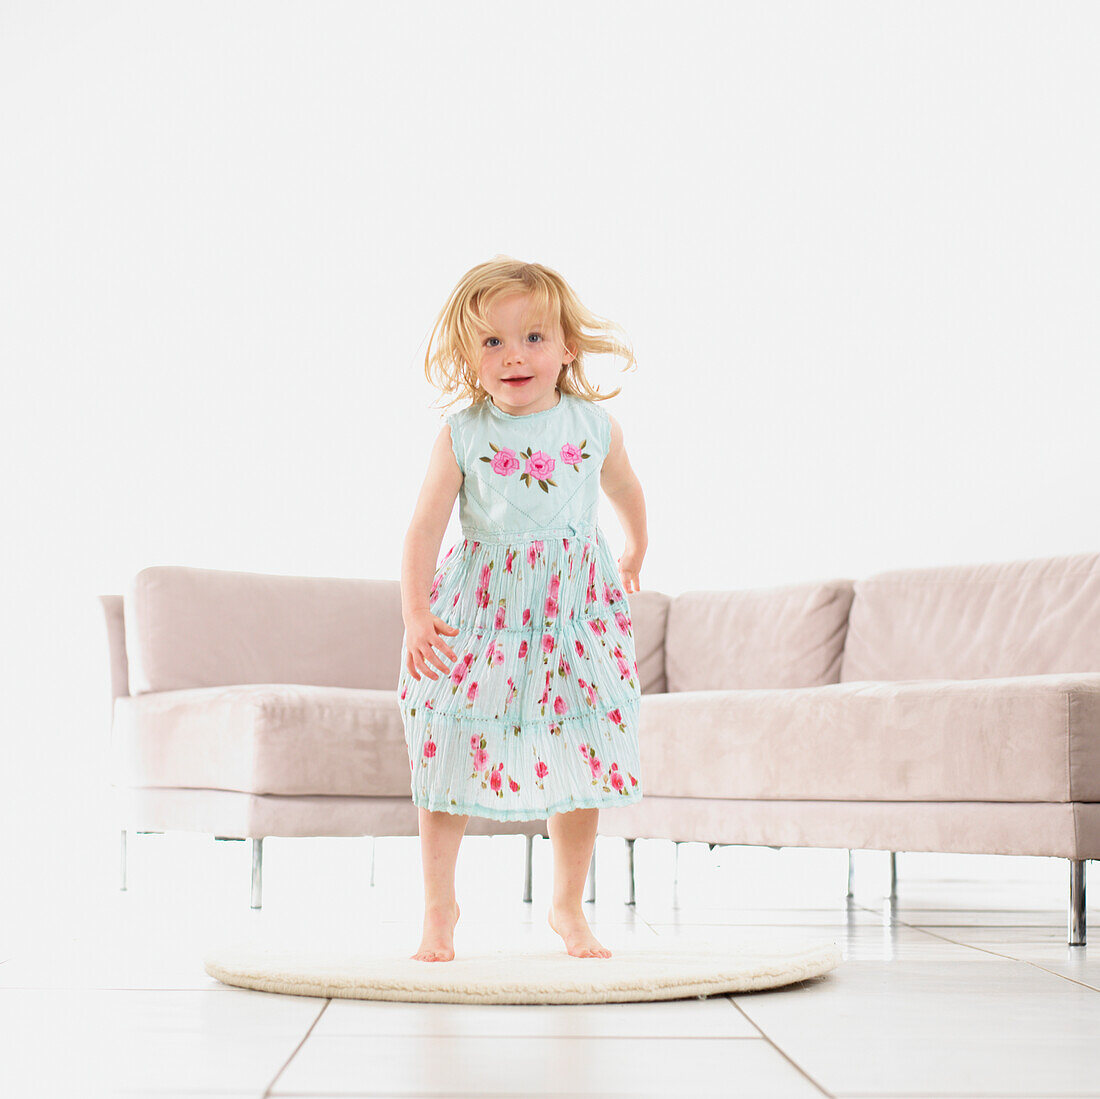 Girl jumping up from a rug in a living room with a sofa